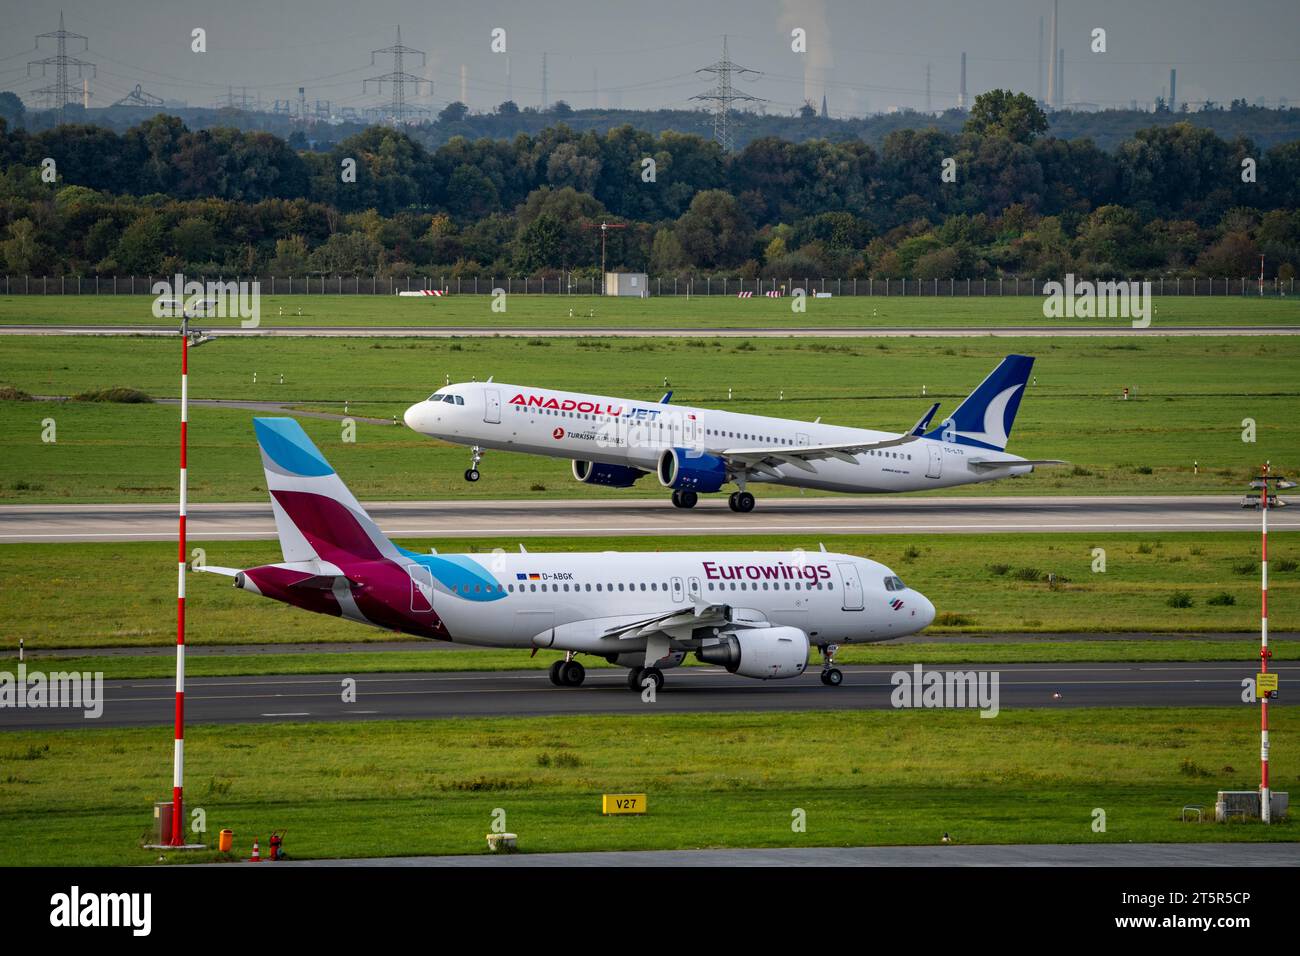 Düsseldorf Airport, Anadolujet aircraft taking off, Eurowings Airbus on the taxiway for take-off, Stock Photo